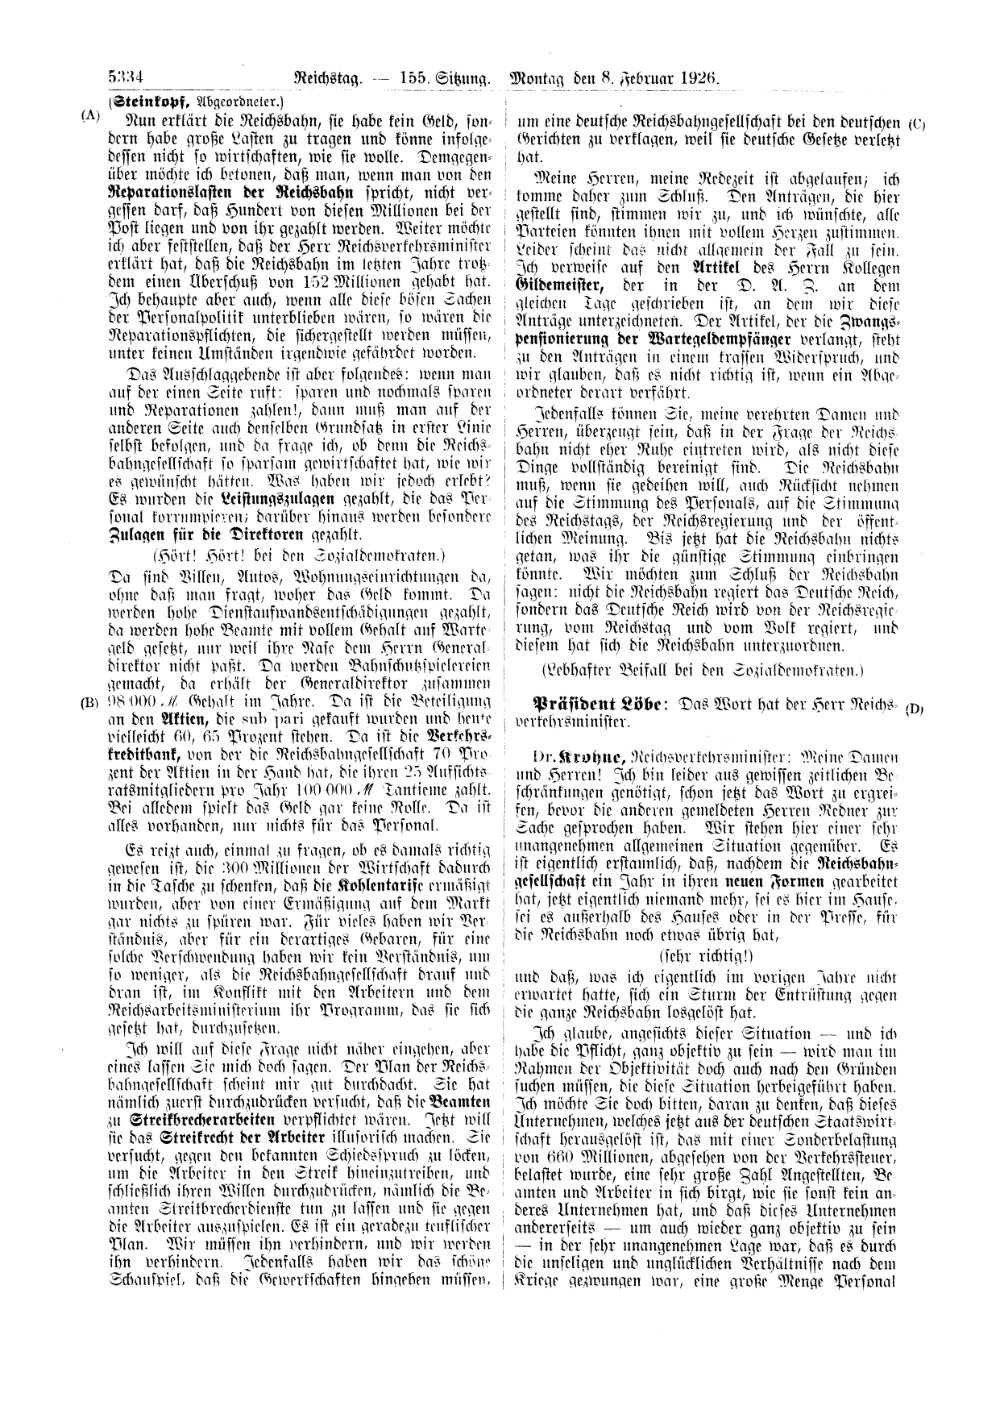 Scan of page 5334